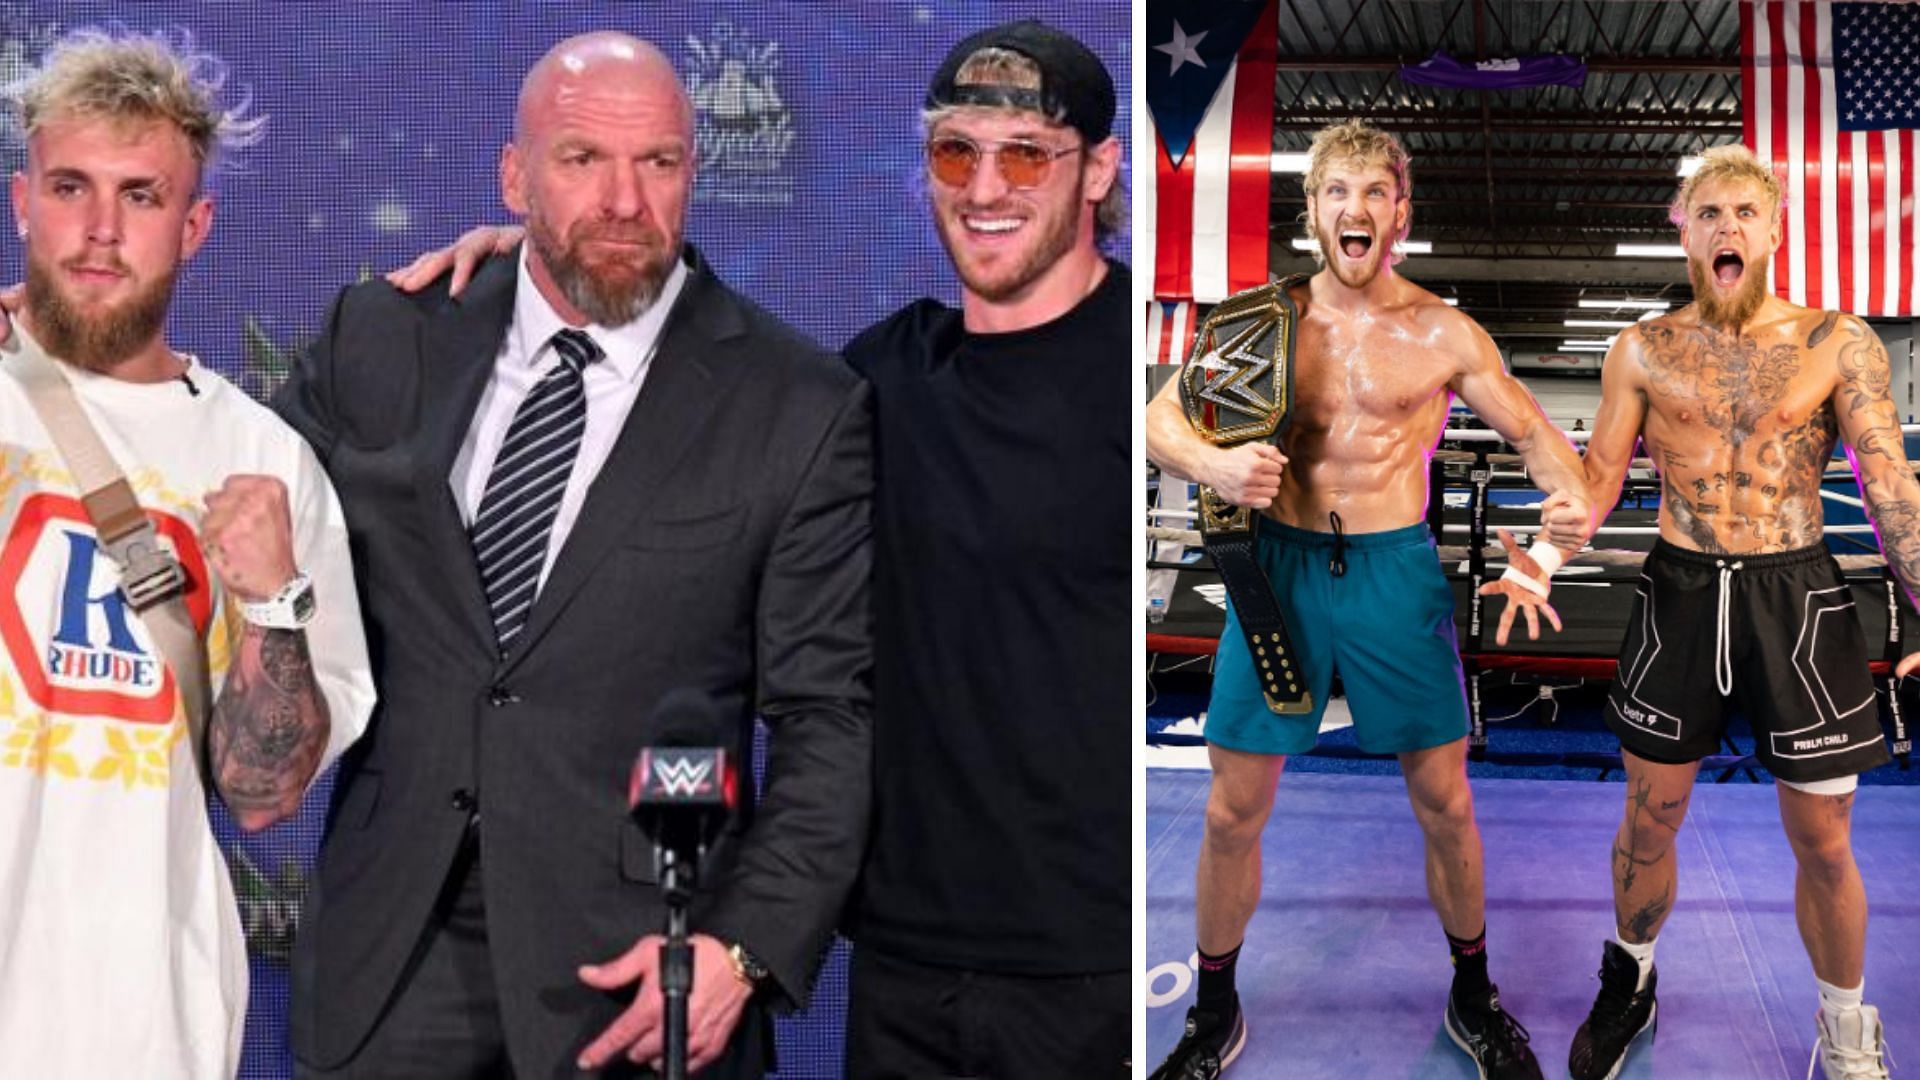 Jake Paul has yet to compete in WWE, unlike his brother Logan Paul